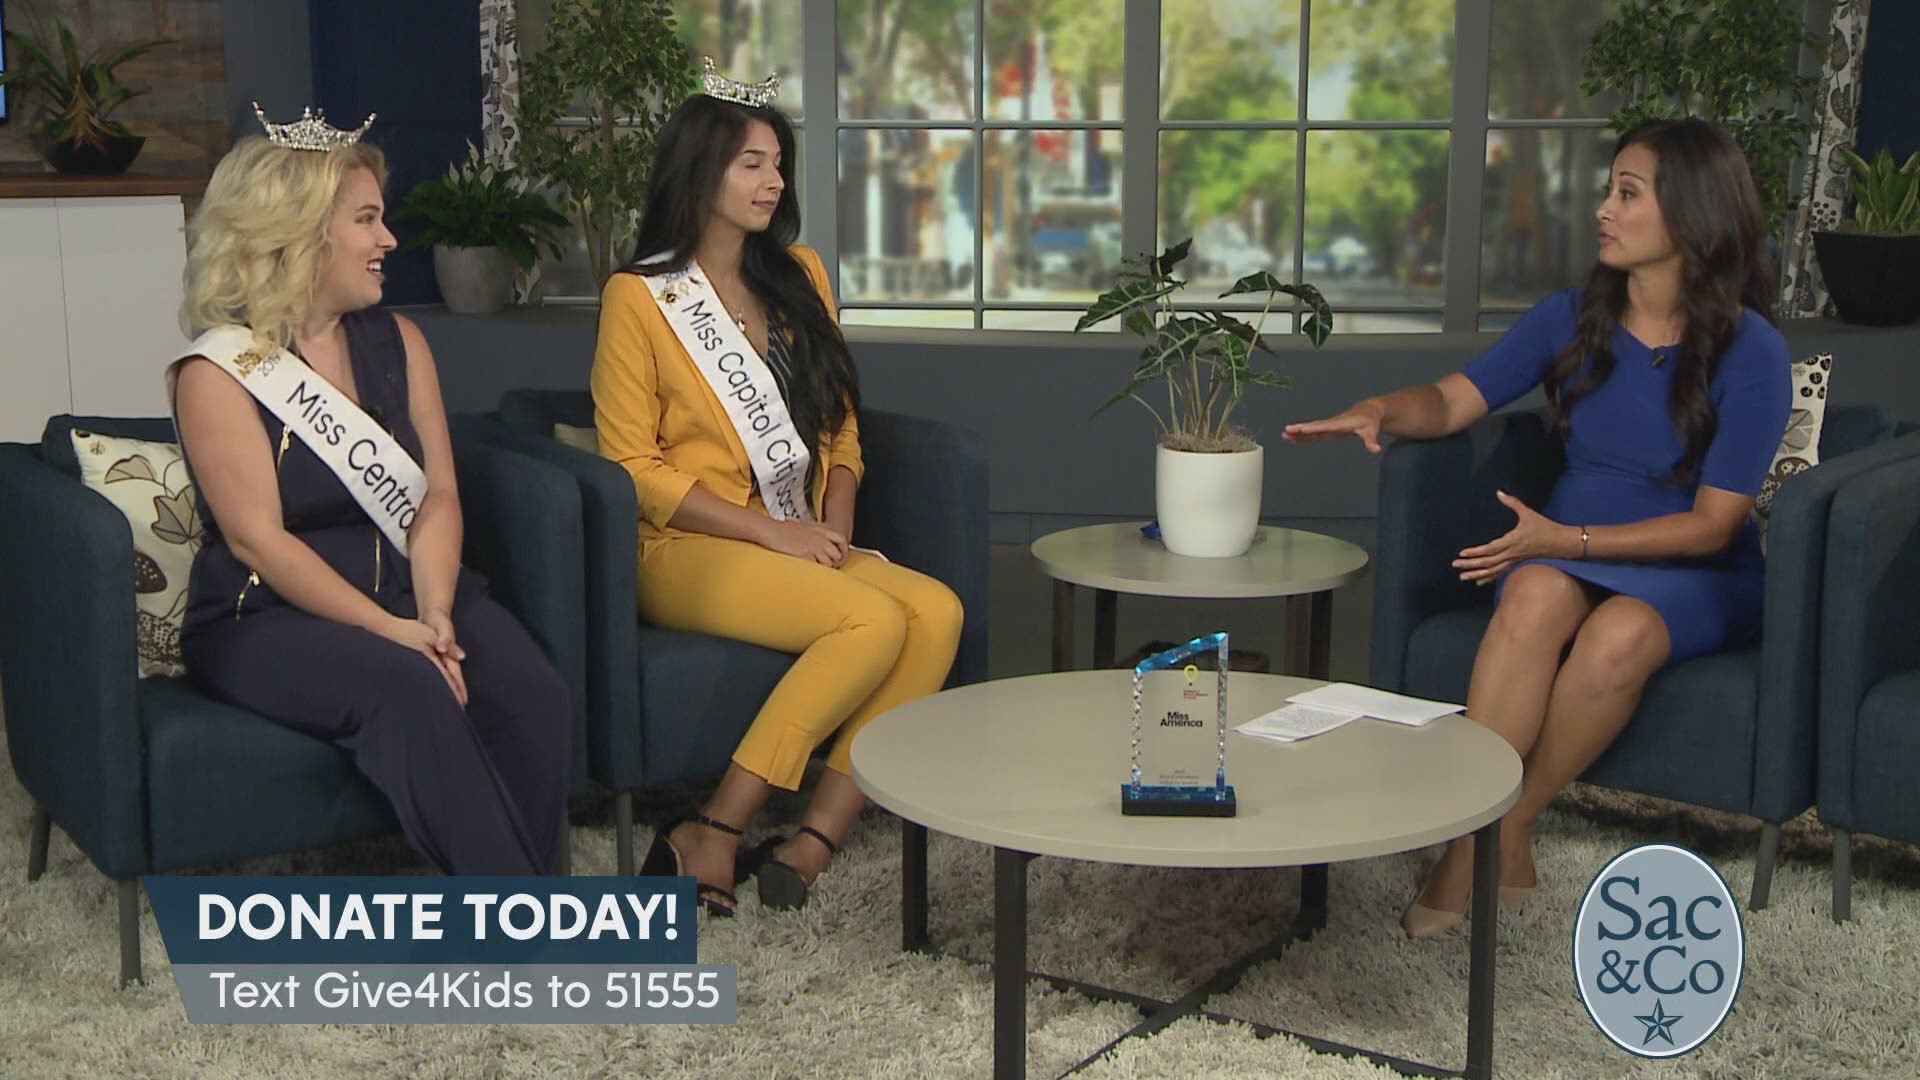 Aubrey Aquino chats with Miss Central California and Miss Capitol City about the Miss American Program and how they find it important to fundraise for the UC Davis Children’s Hospital. The following is a paid segment sponsored by UC Davis Children’s Hospital.